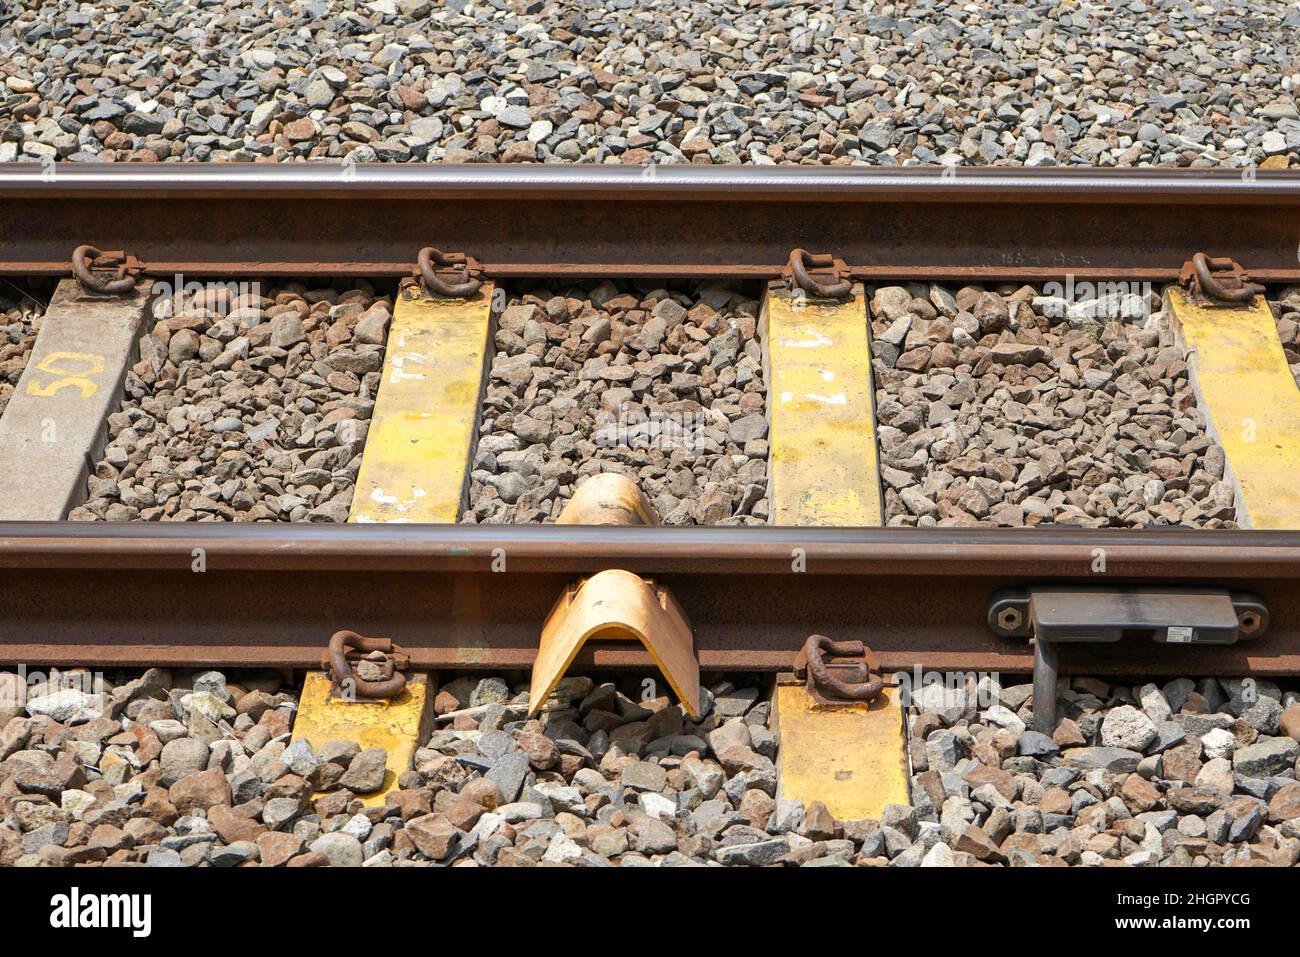 A railway track (British English and UIC terminology) or railroad track (American English), also known as permanent way or simply track, is the struct Stock Photo